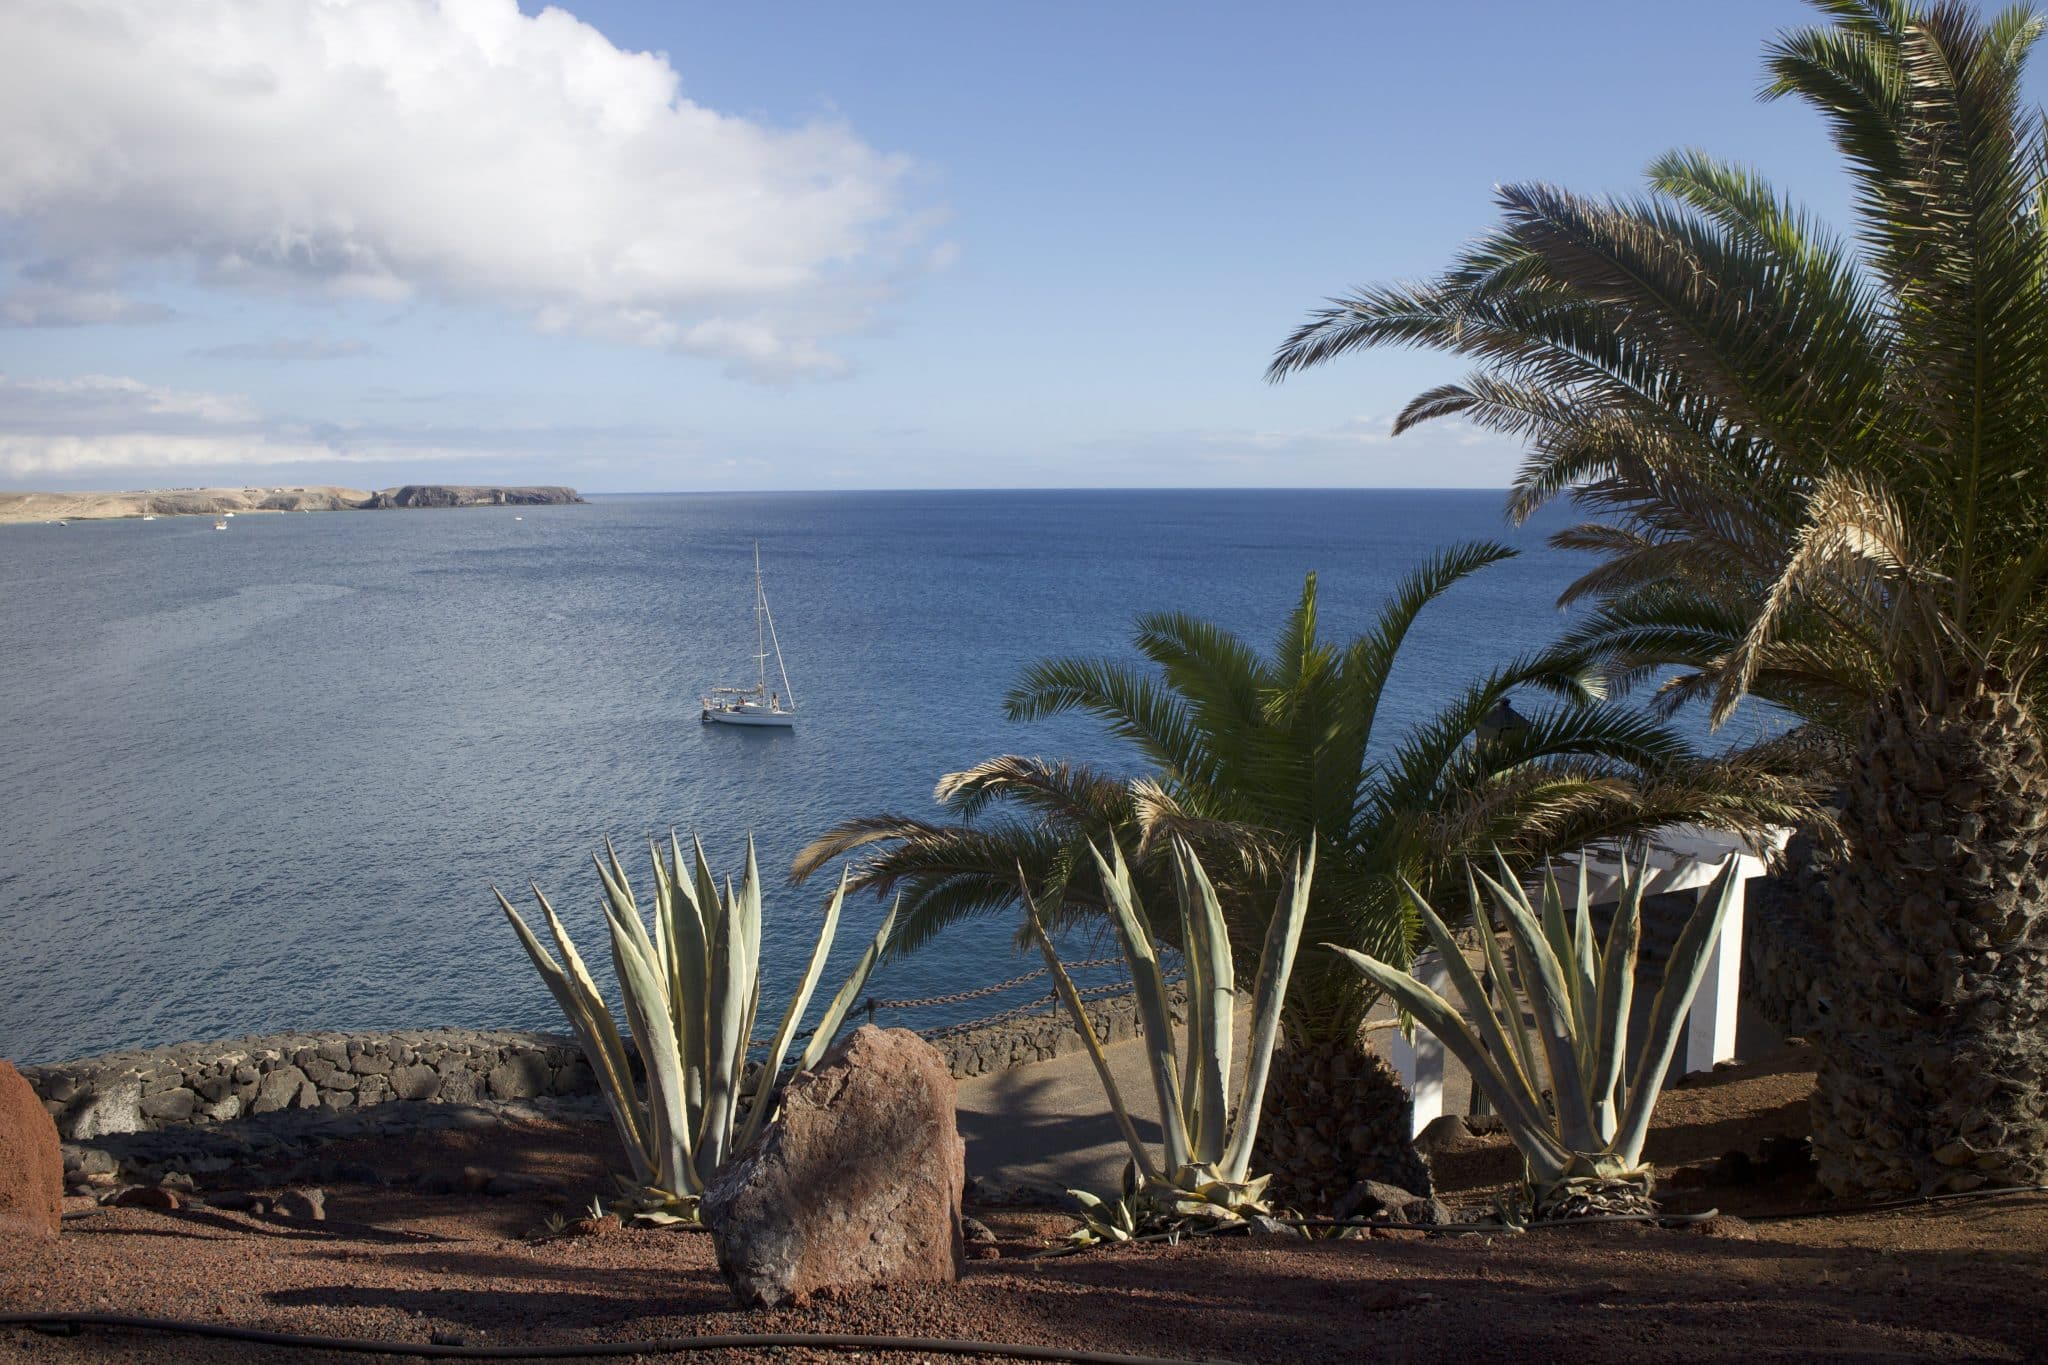 Lanzarote travel report – tips, experiences & highlights